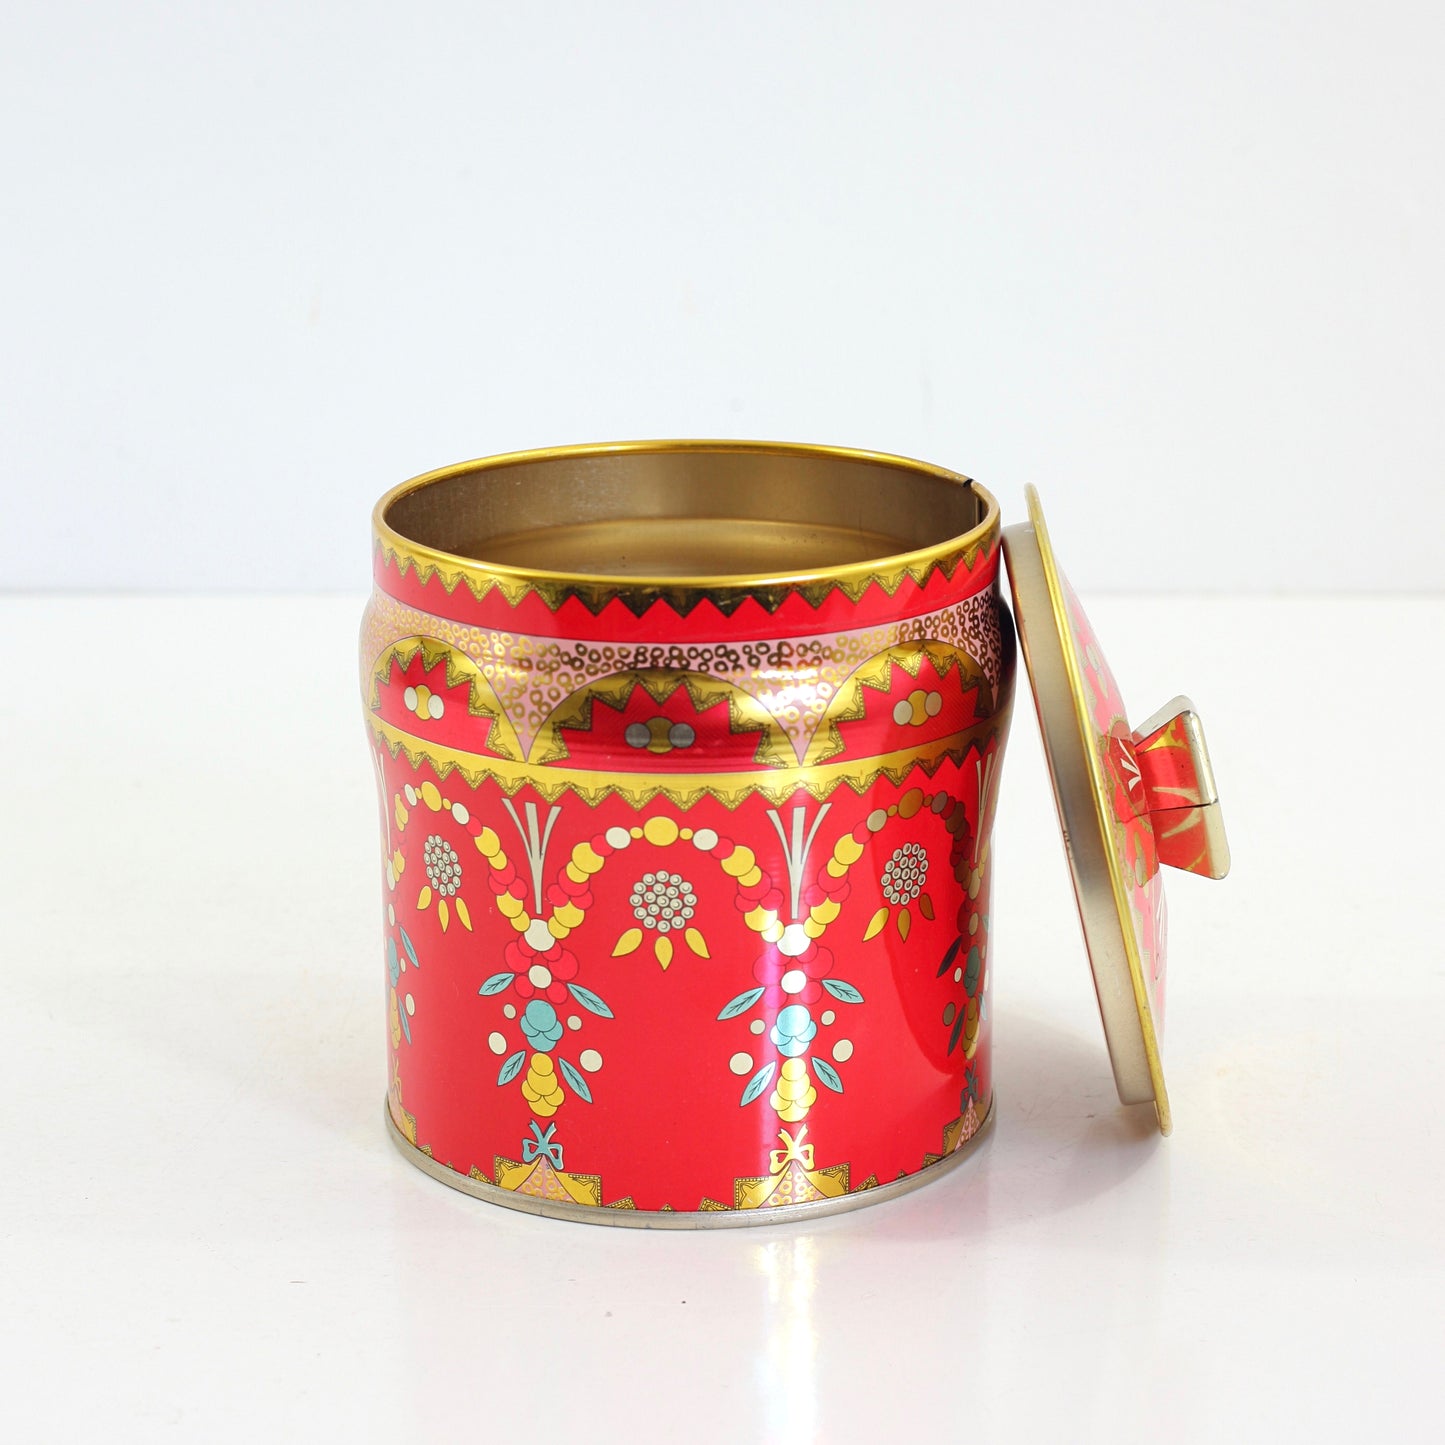 SOLD - Vintage Red Floral Tin from England